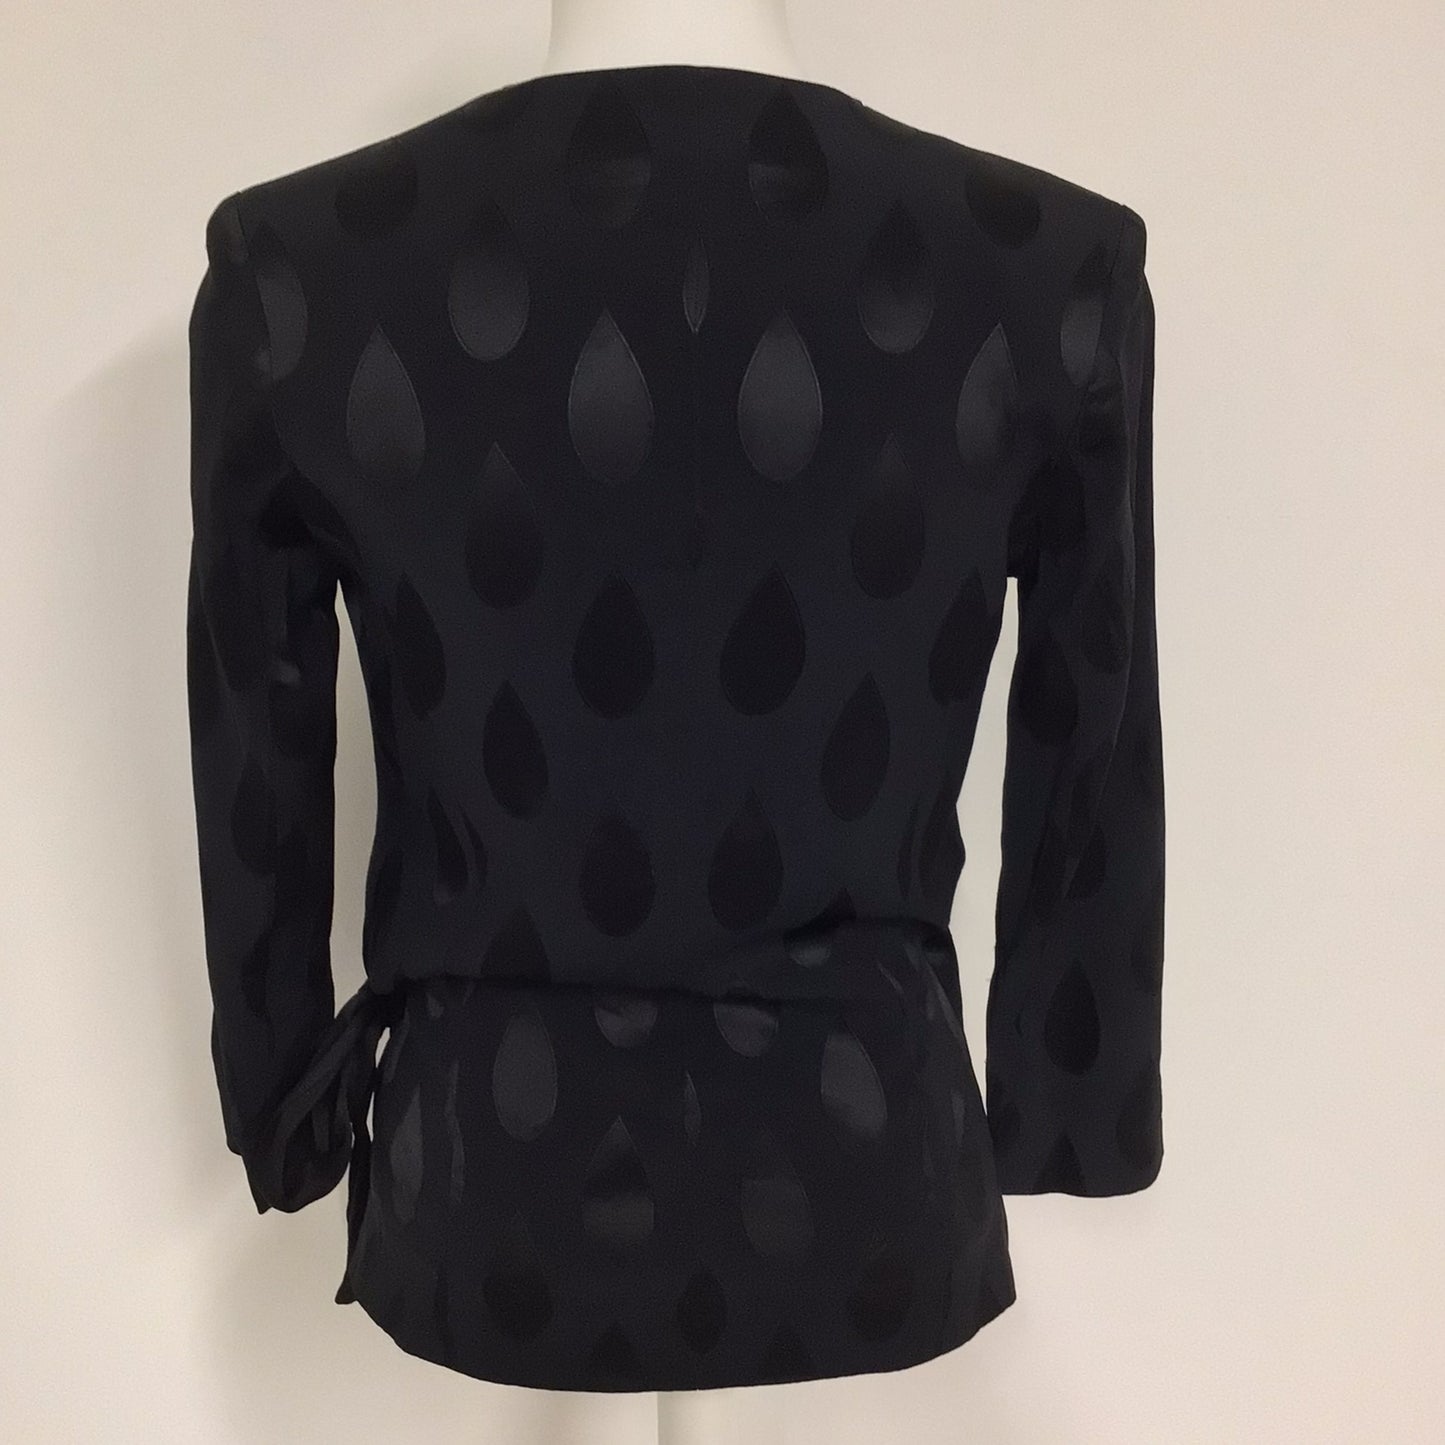 French Connection Black Satin Patterned Wrap Top Blouse w/Shoulder Pads Size 10